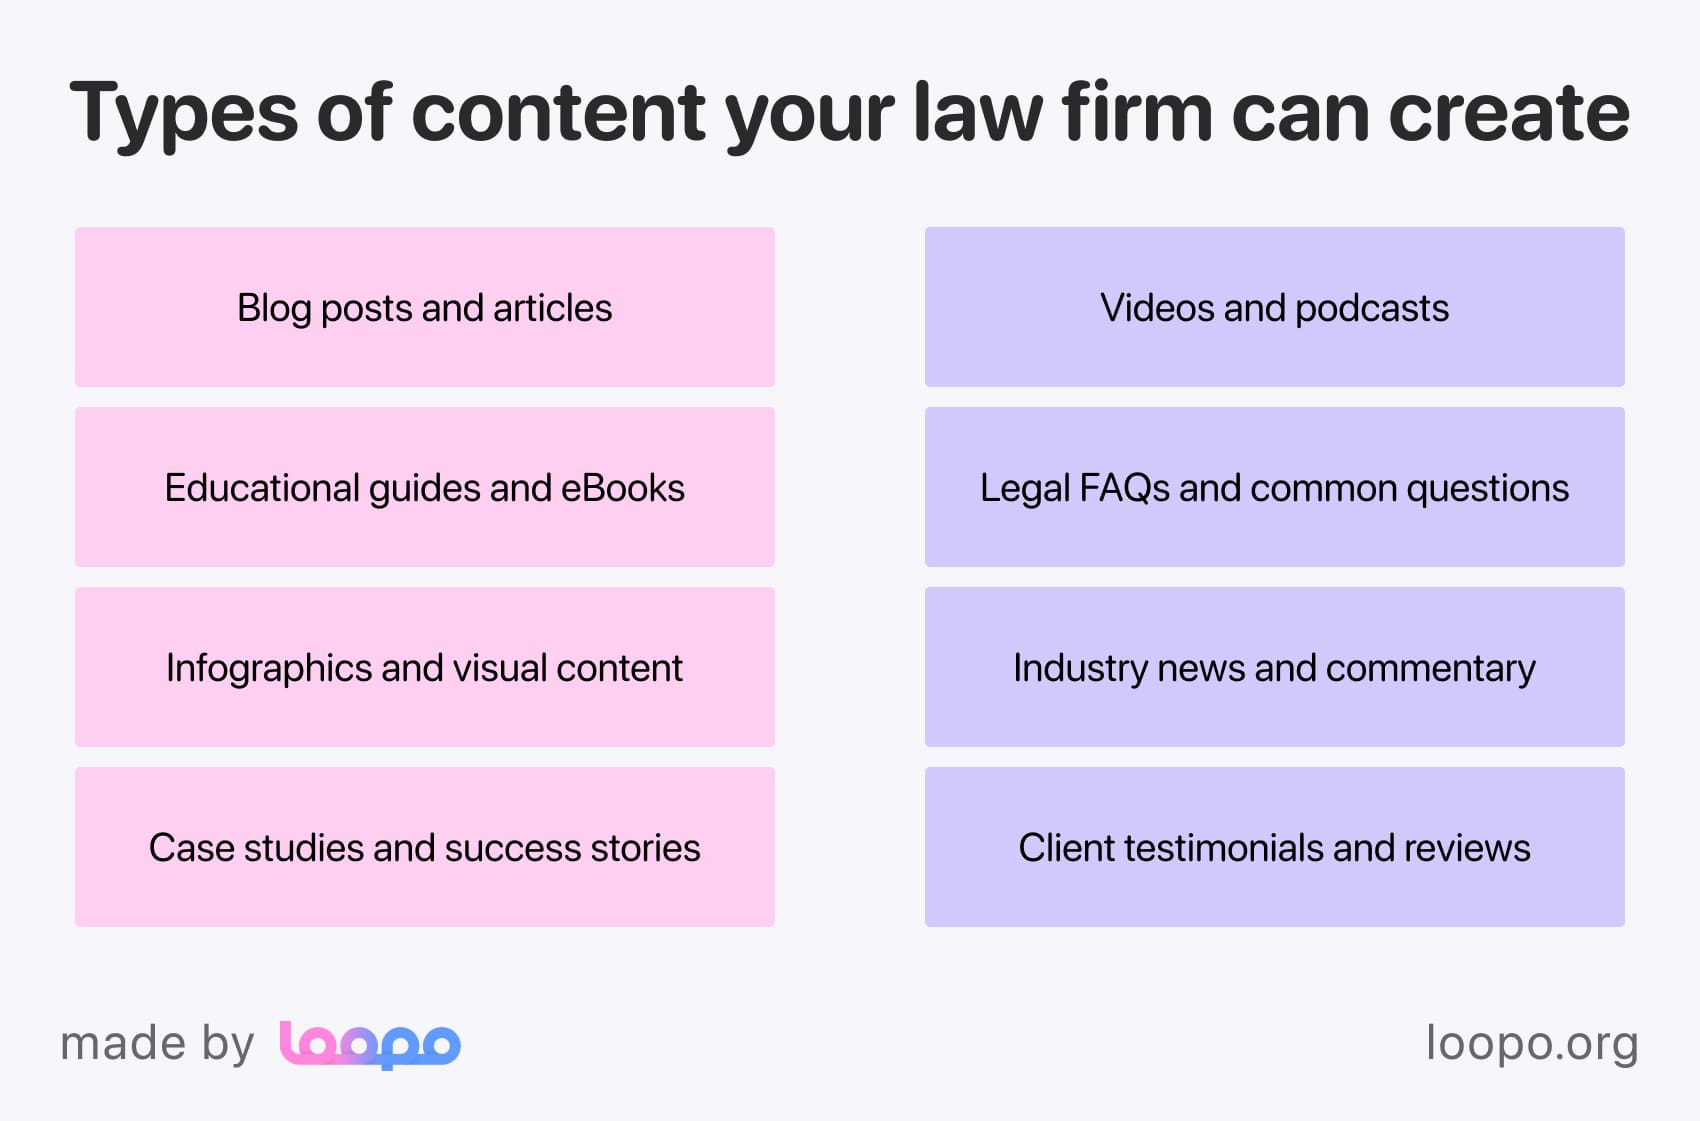 Content types suitable for a law firm